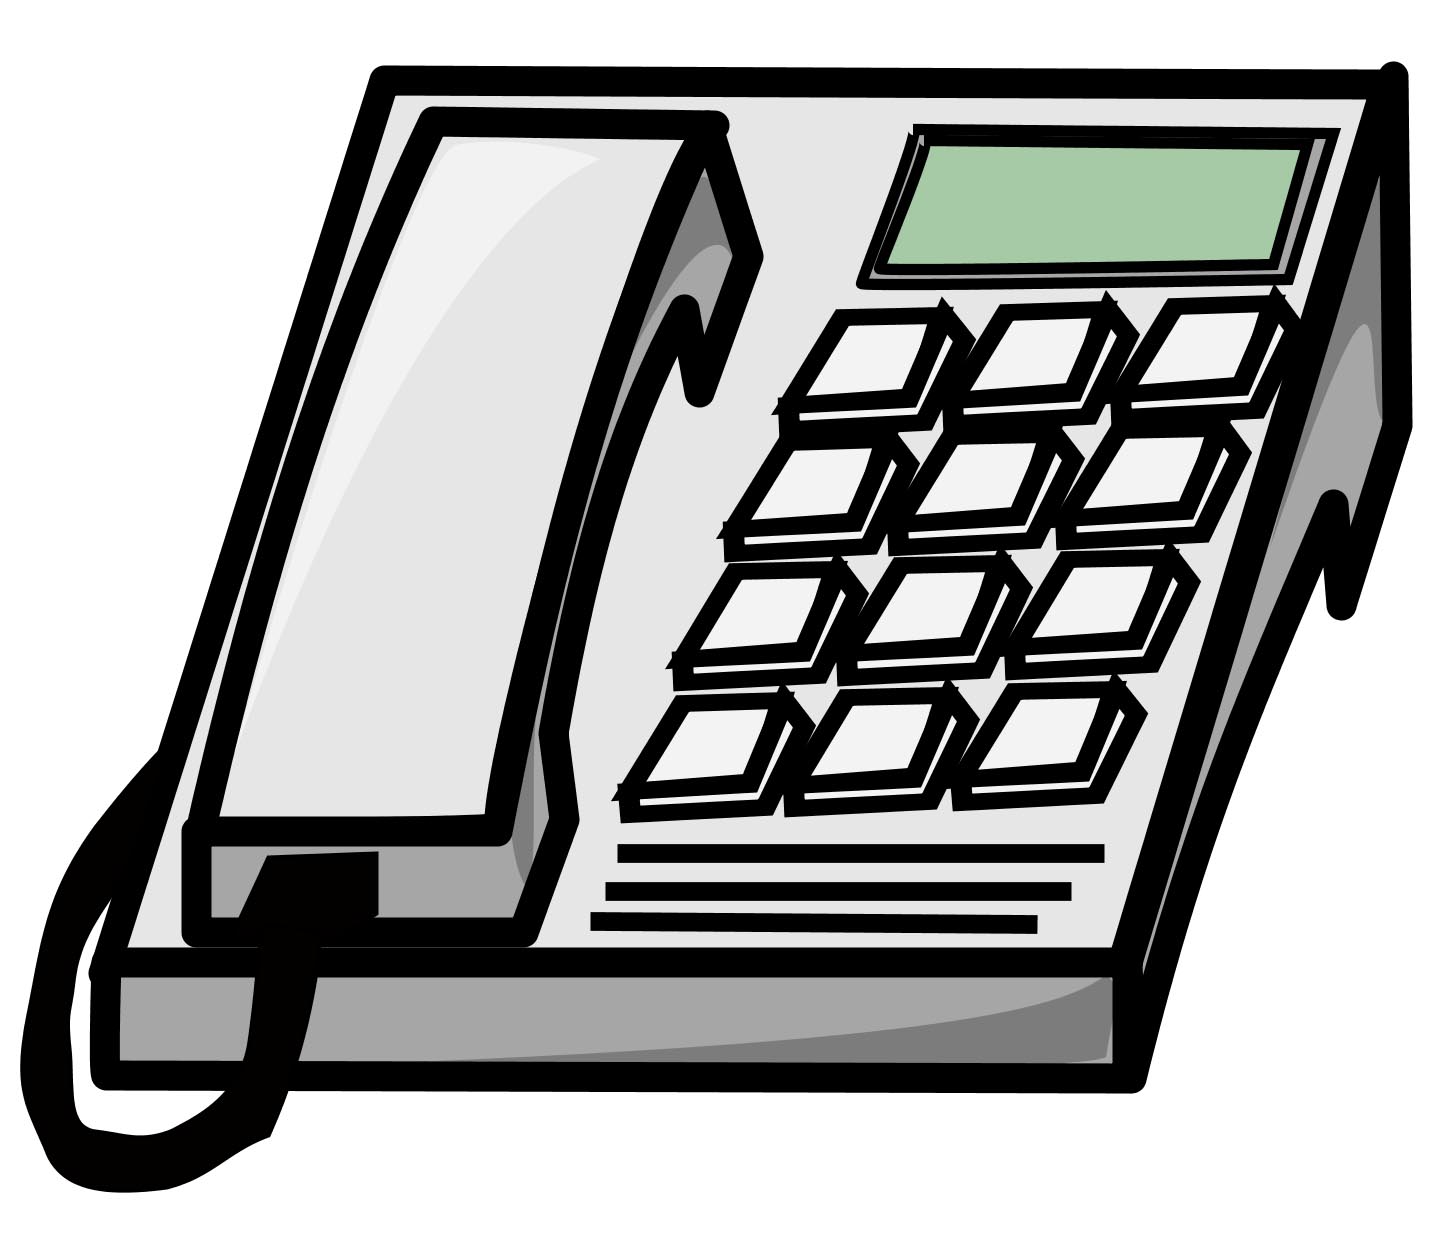 Telephone phone clip art images free clipart